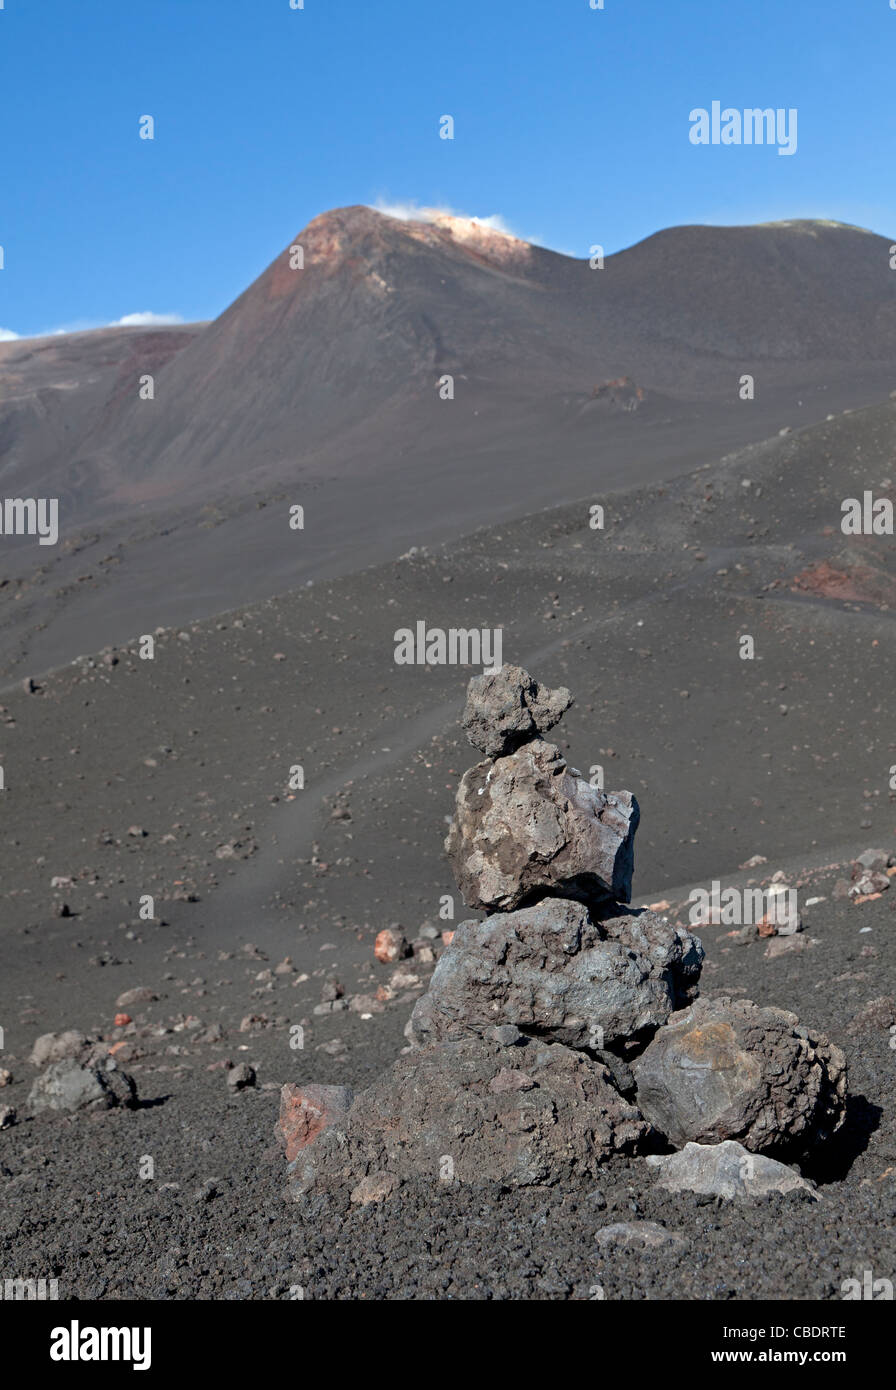 Cairn comprising of lava near Mount Etna, Sicily, Italy Stock Photo